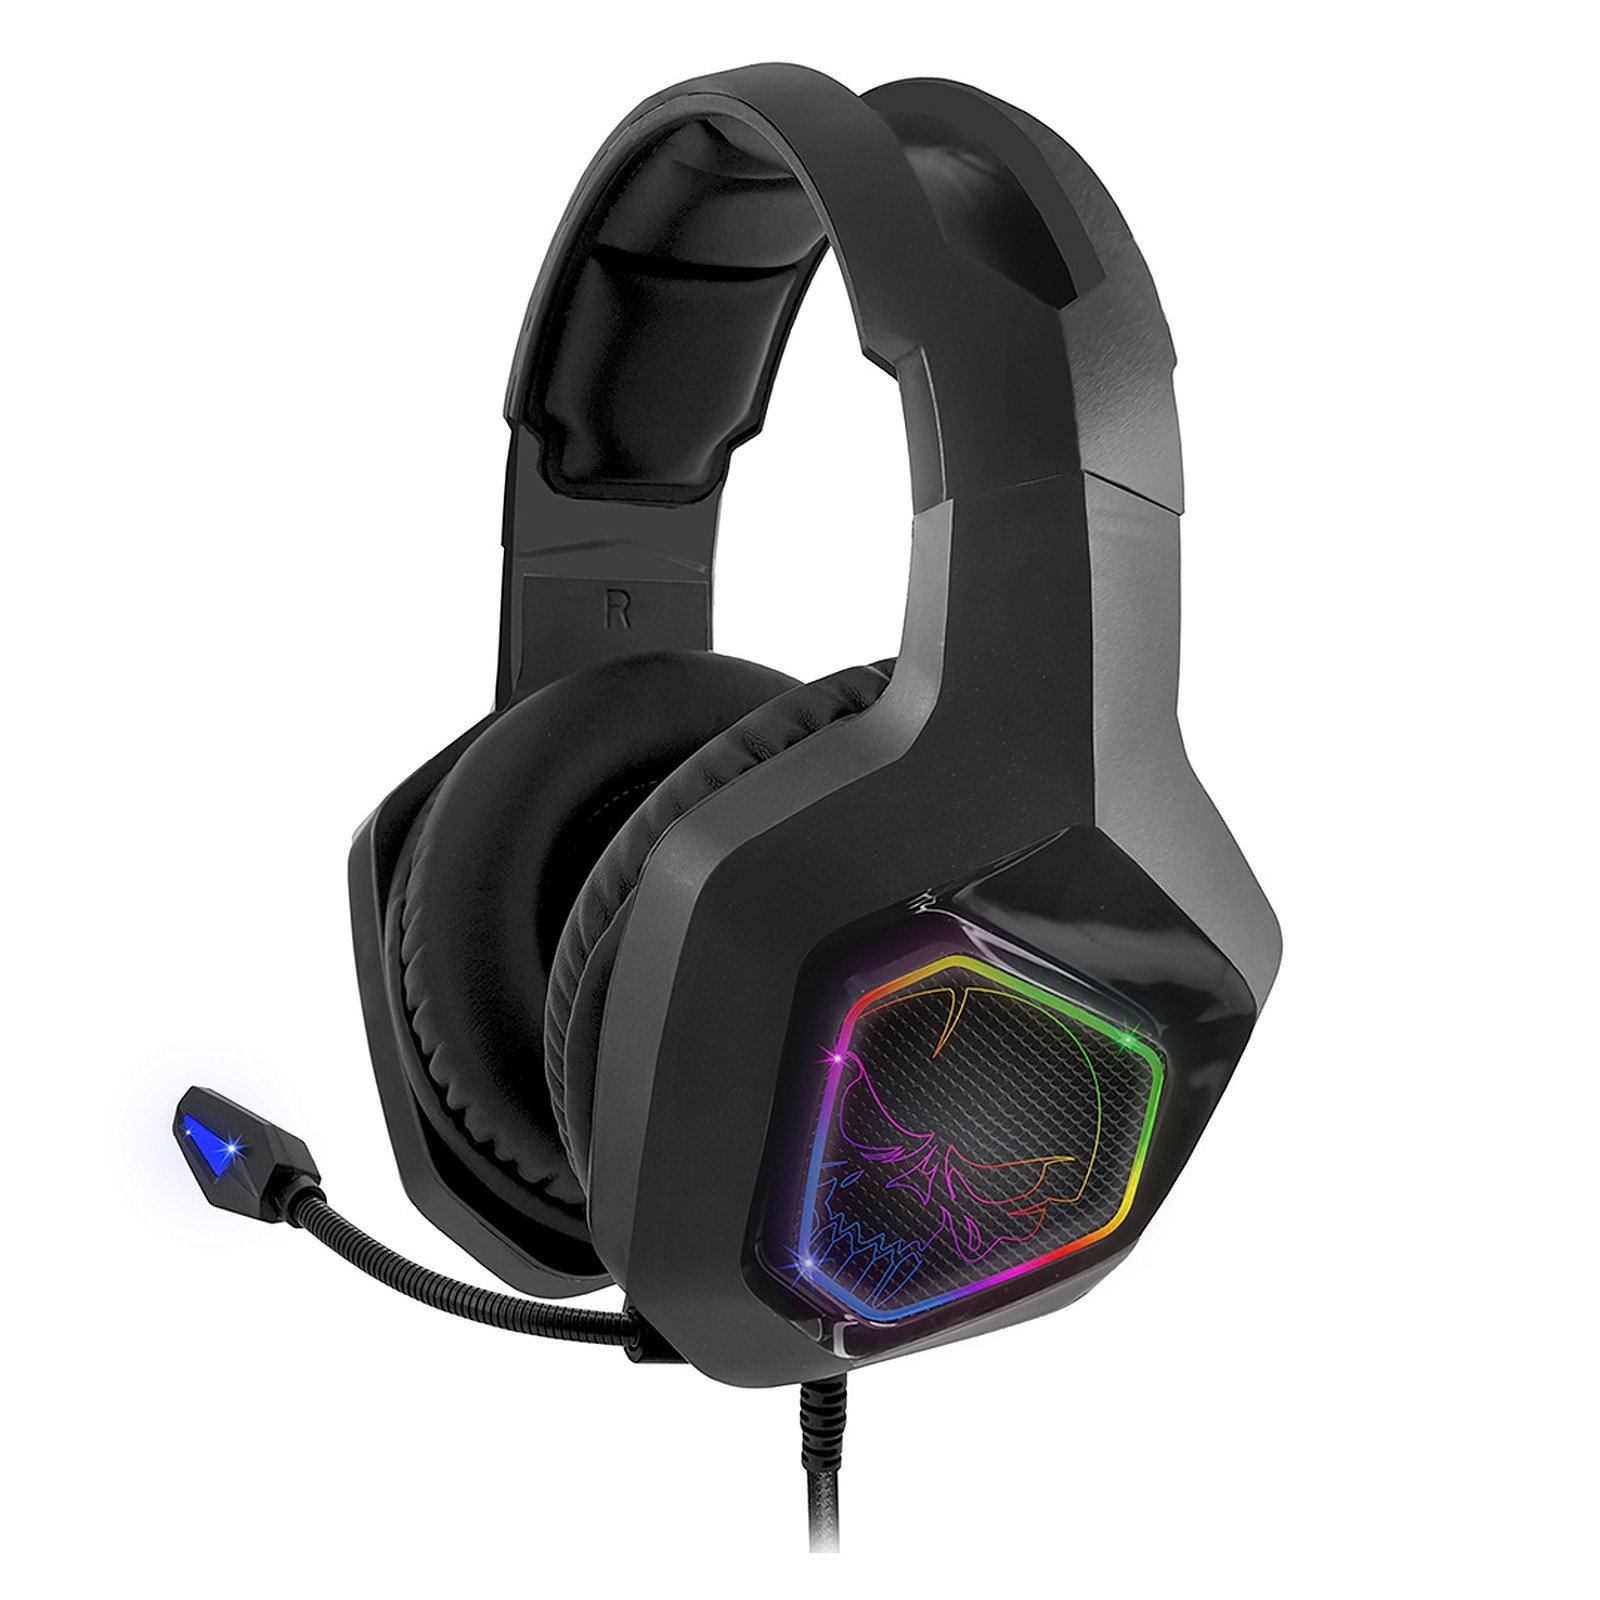 CASQUE-MICRO SPIRIT OF GAMER ELITE-H50 BLACK EDITIONRGB COMPATIBLE PC/ XBOX ONE  PS4/ SWITCH / NOIR